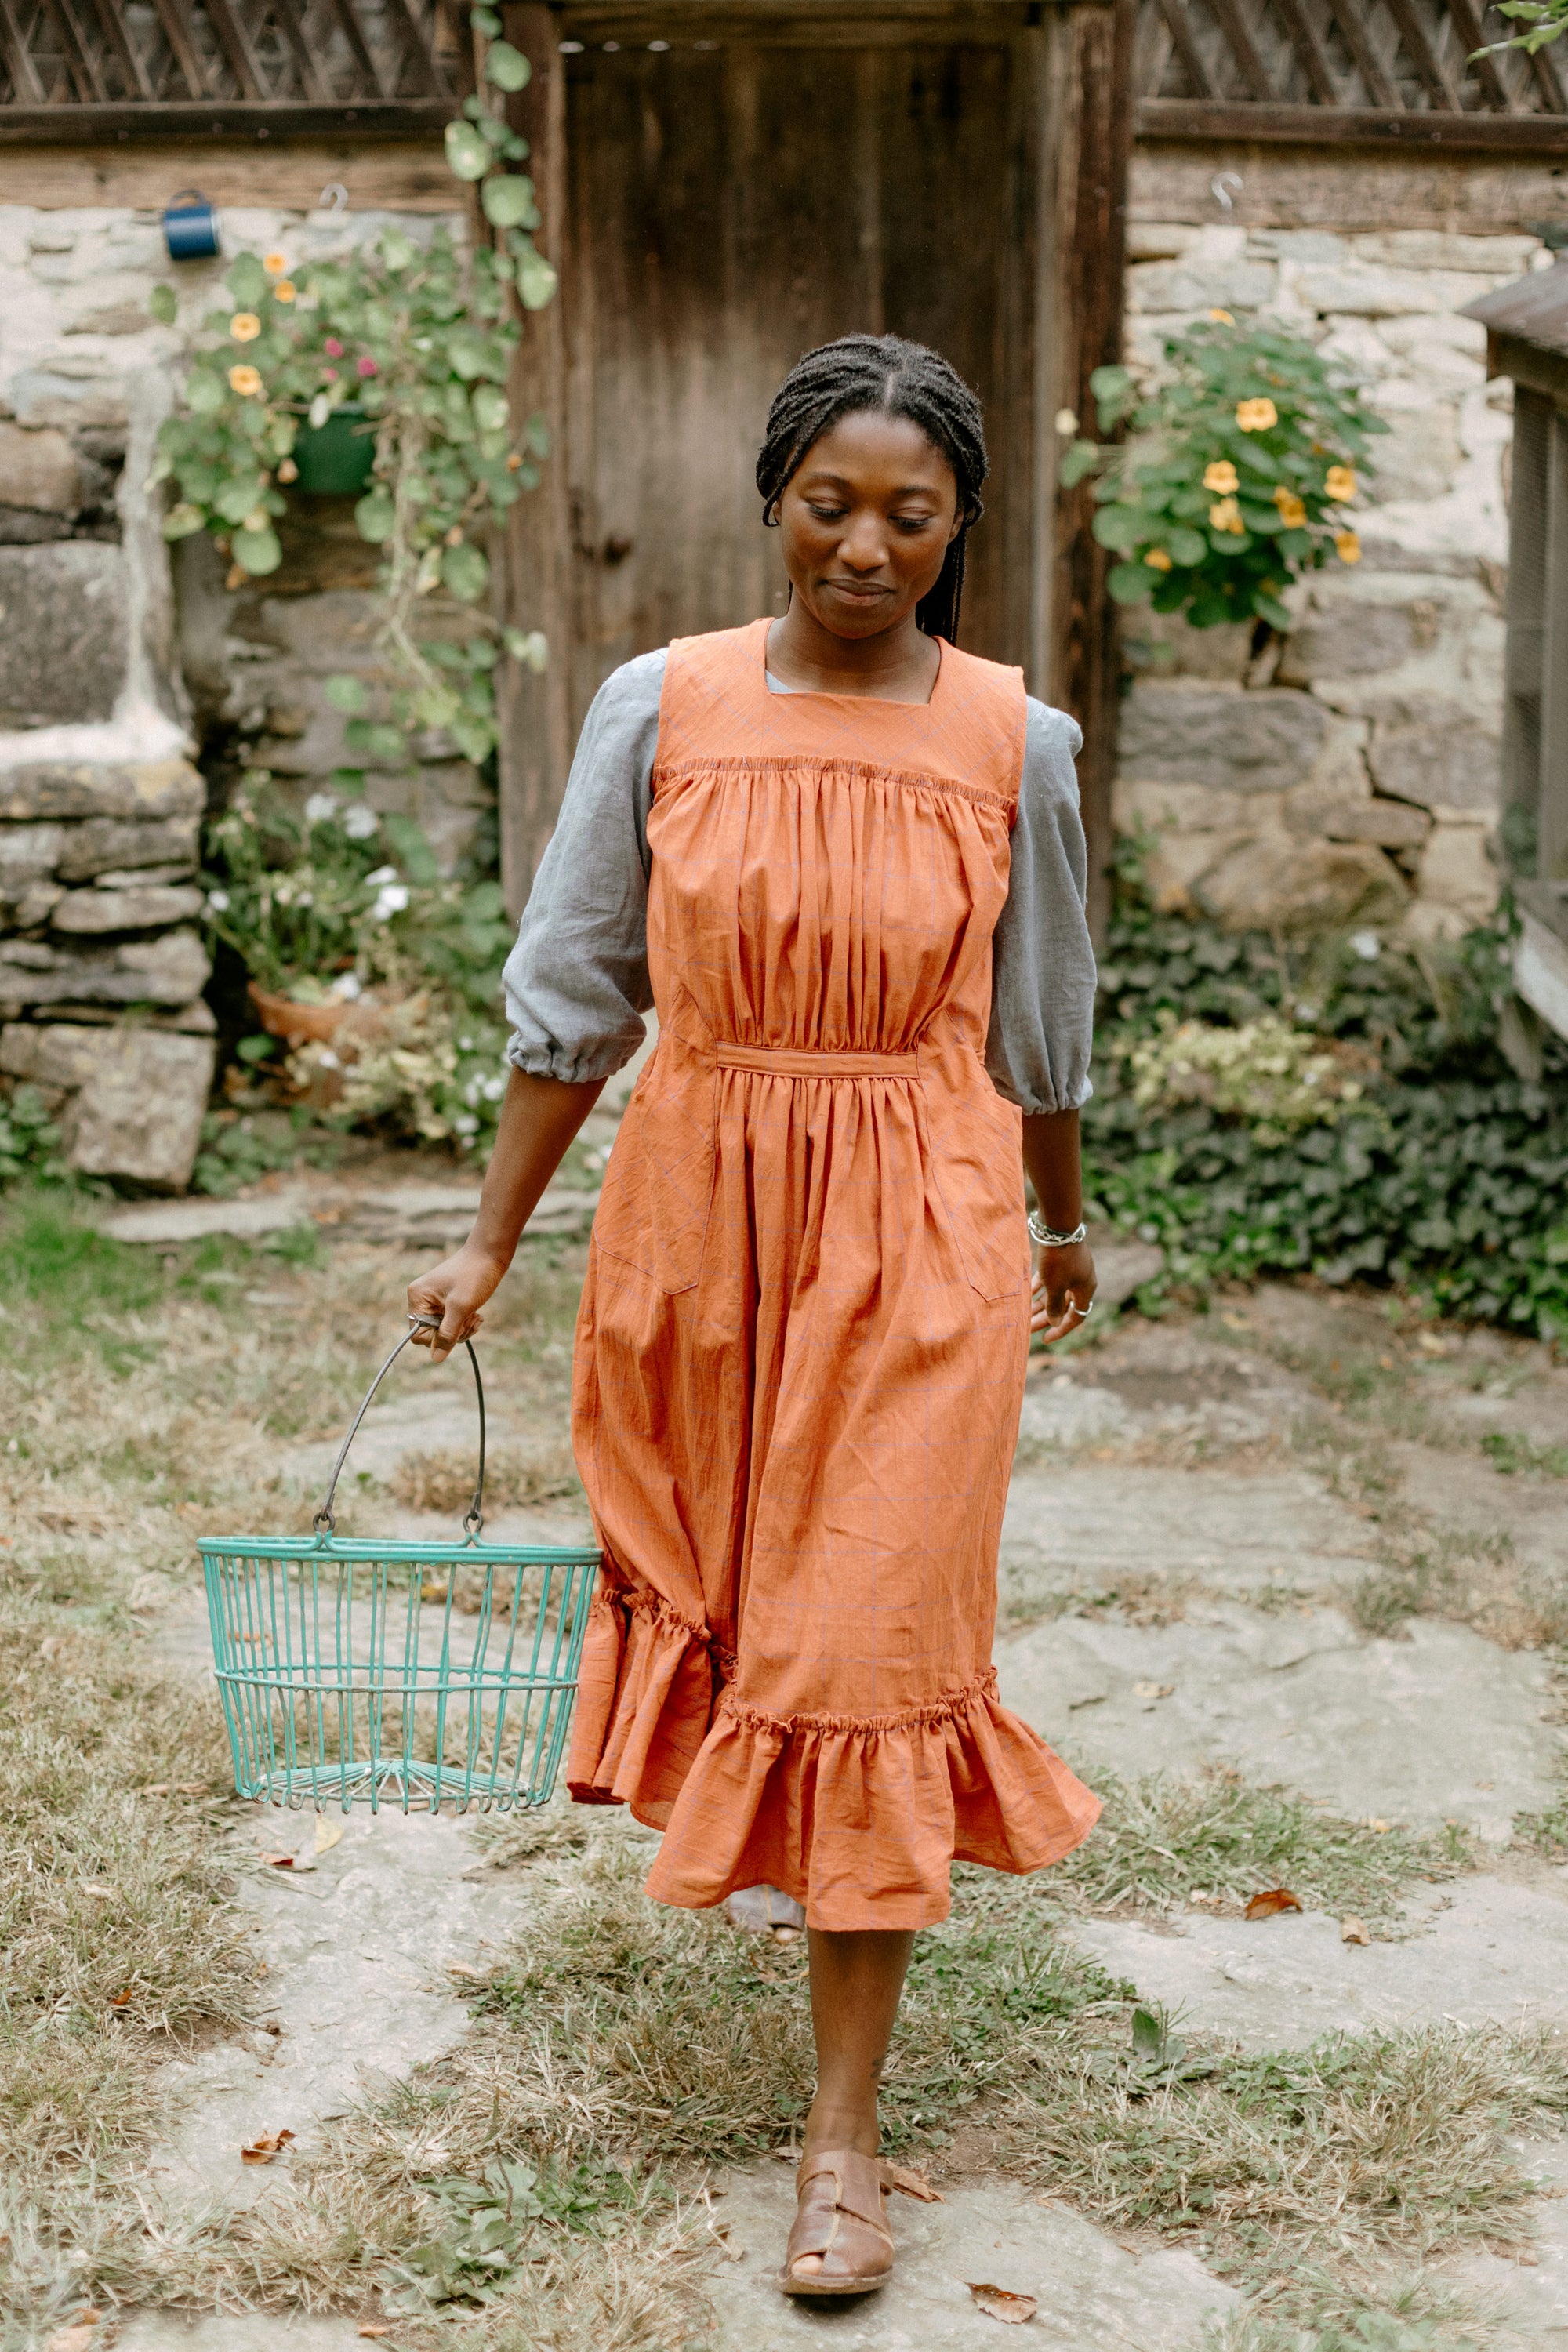 Black woman wearing a grey elbow-length sleeved Muumuu with an organic gabacha (apron) over the dress.  She is carrying an egg basket and apron has a flounce.